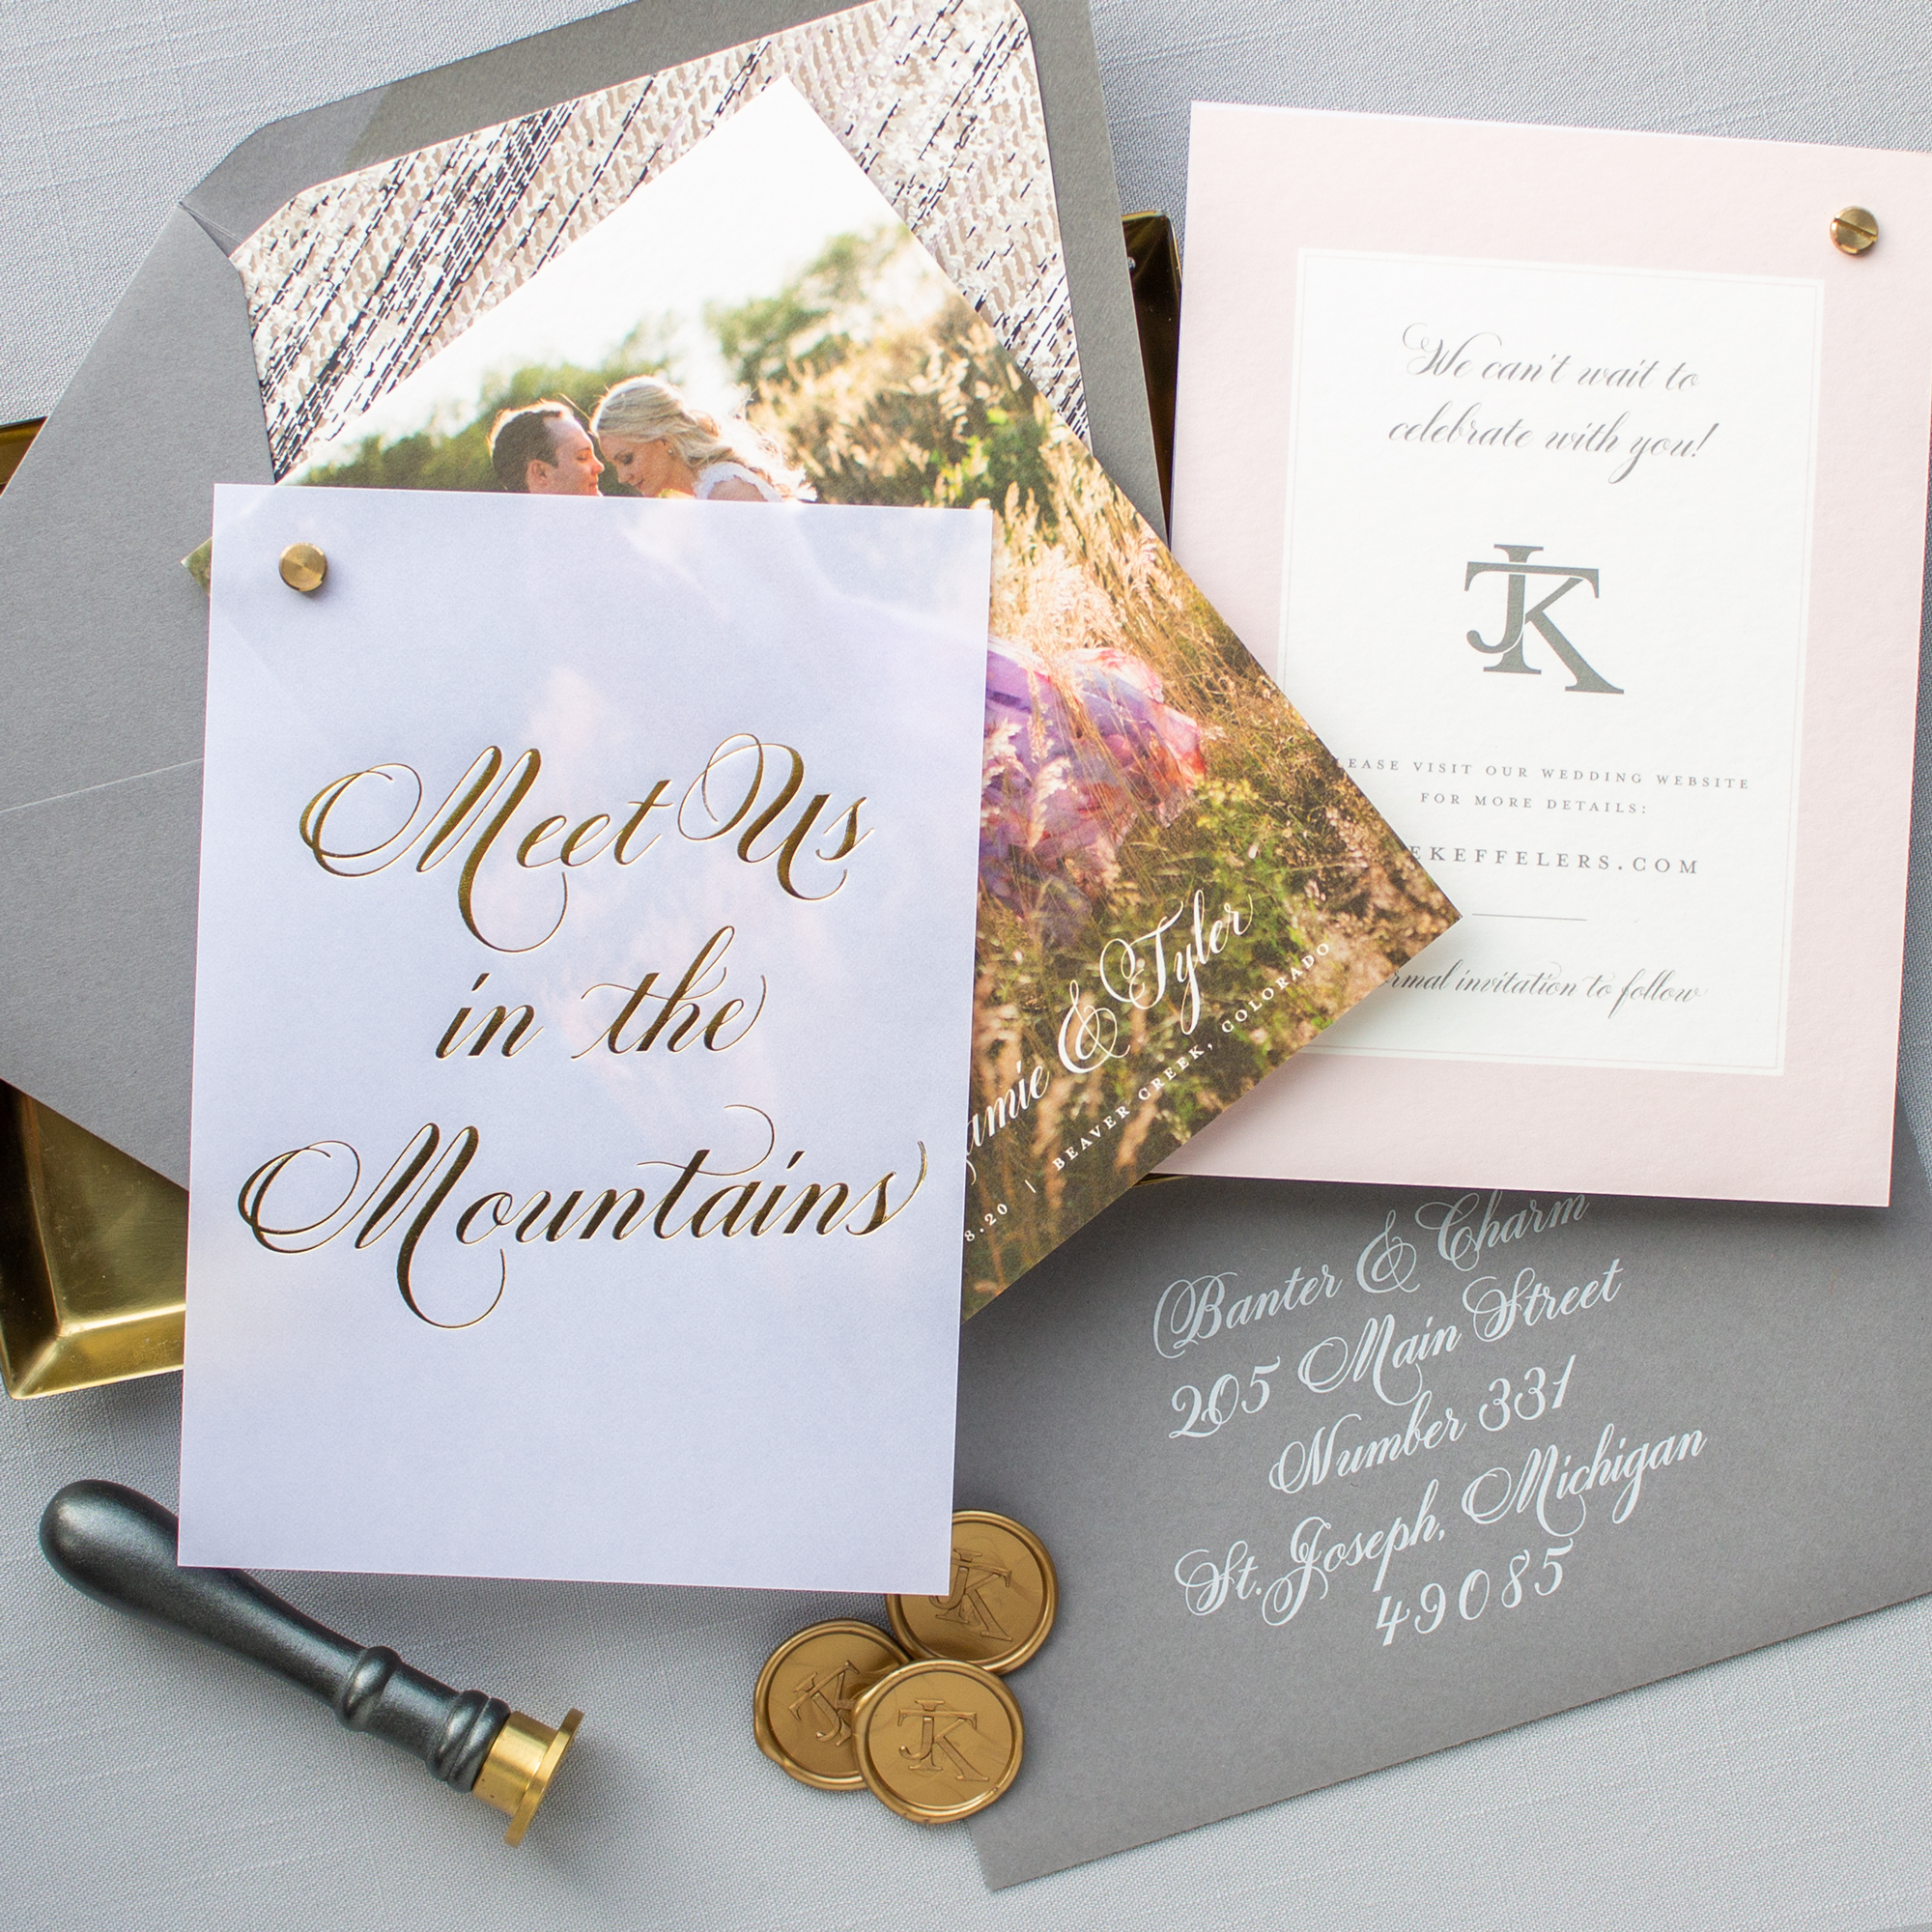 Gold Foil Vellum Save the Date for mountain wedding